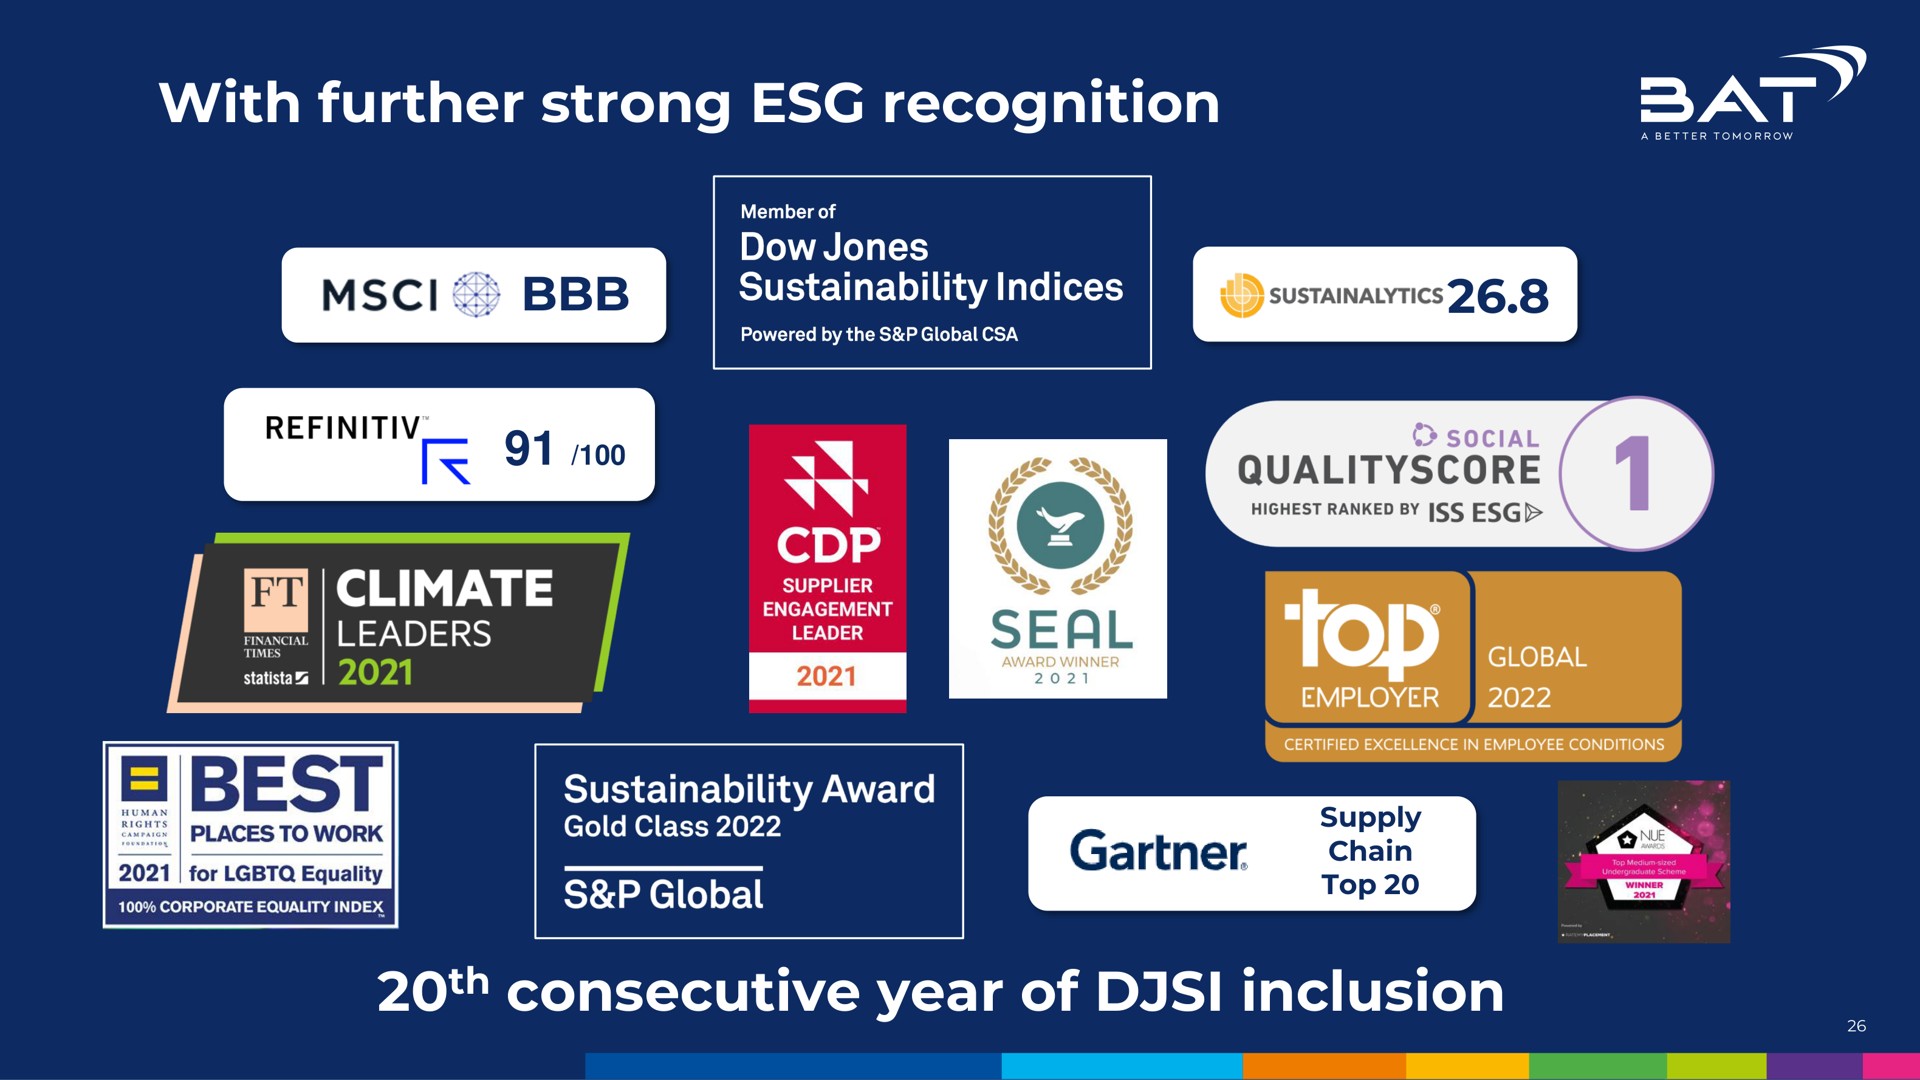 with further strong recognition consecutive year of inclusion at a best ere | BAT